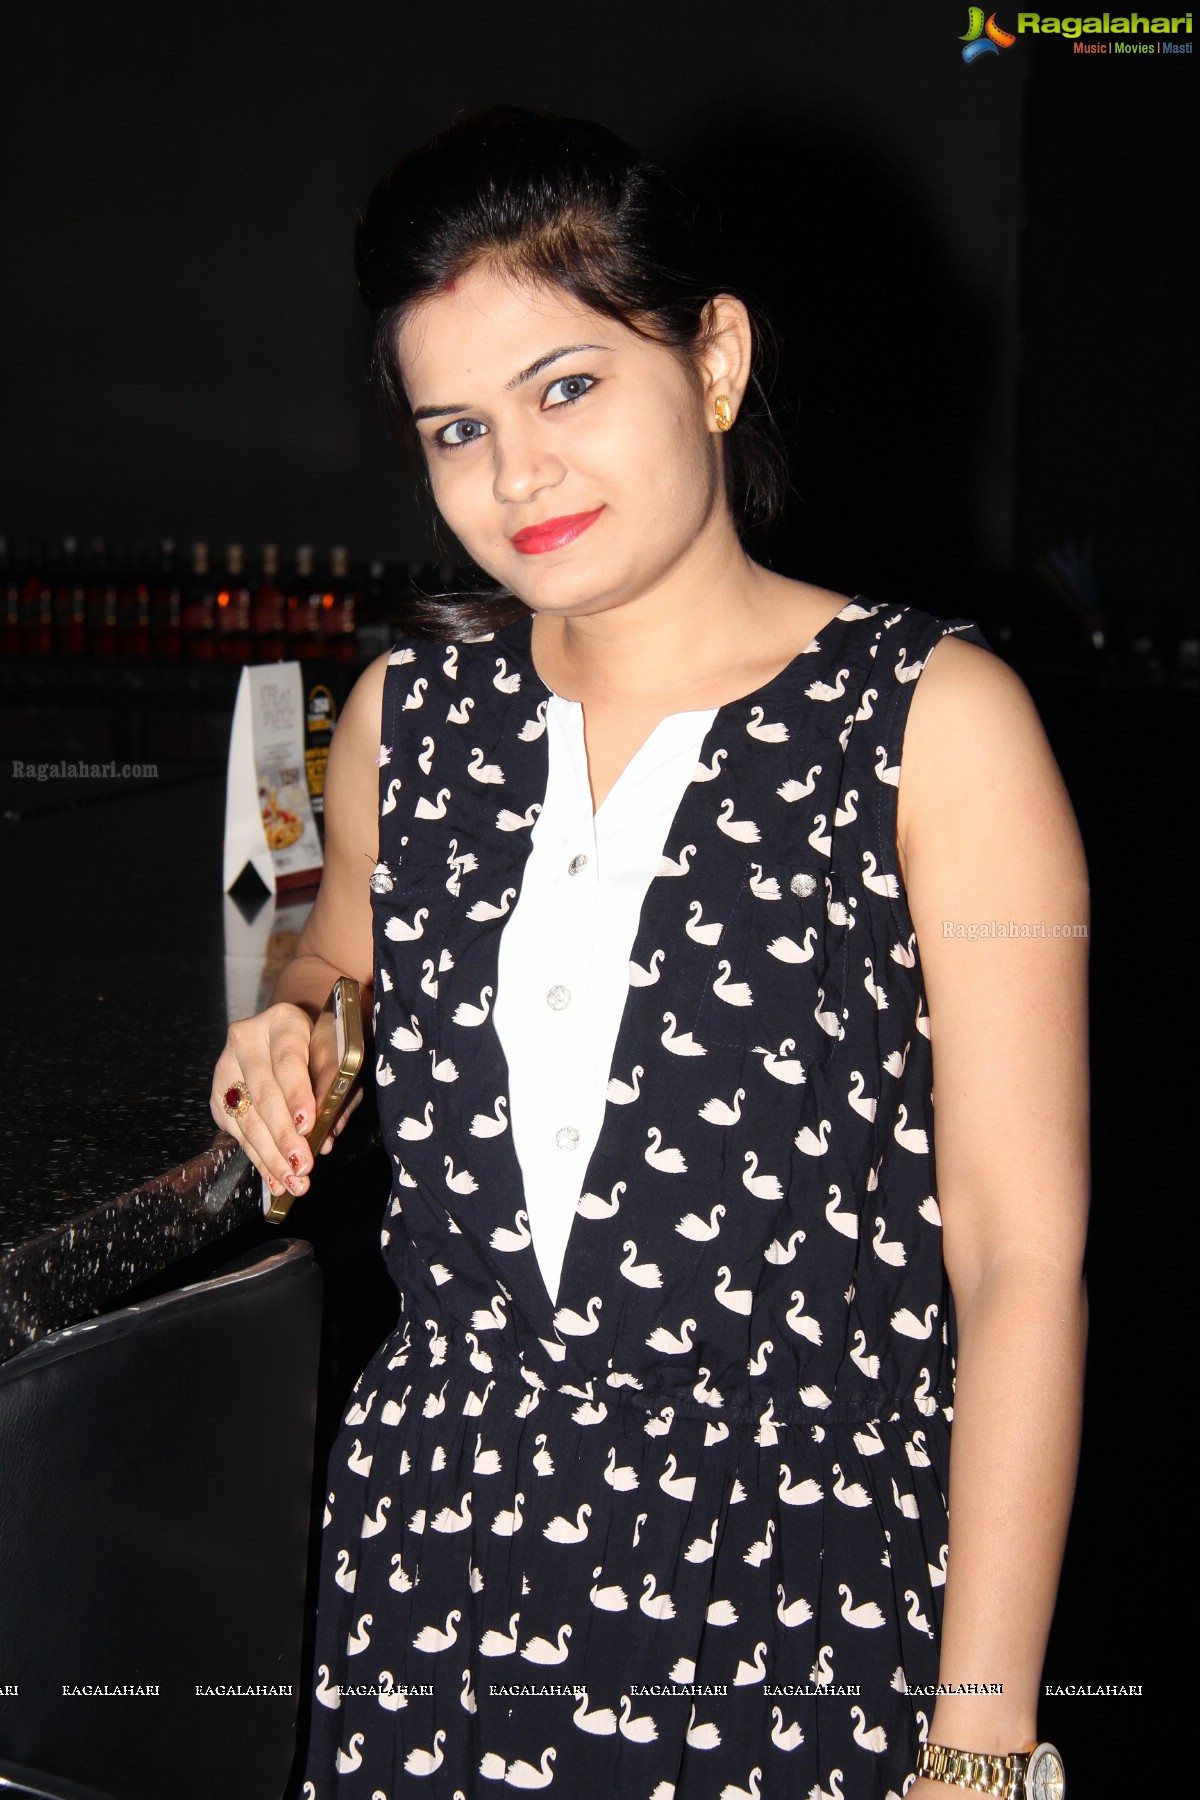 Friendz Forever Party by Simran Solaki at B&C, Hyderabad (Aug. 6, 2014)